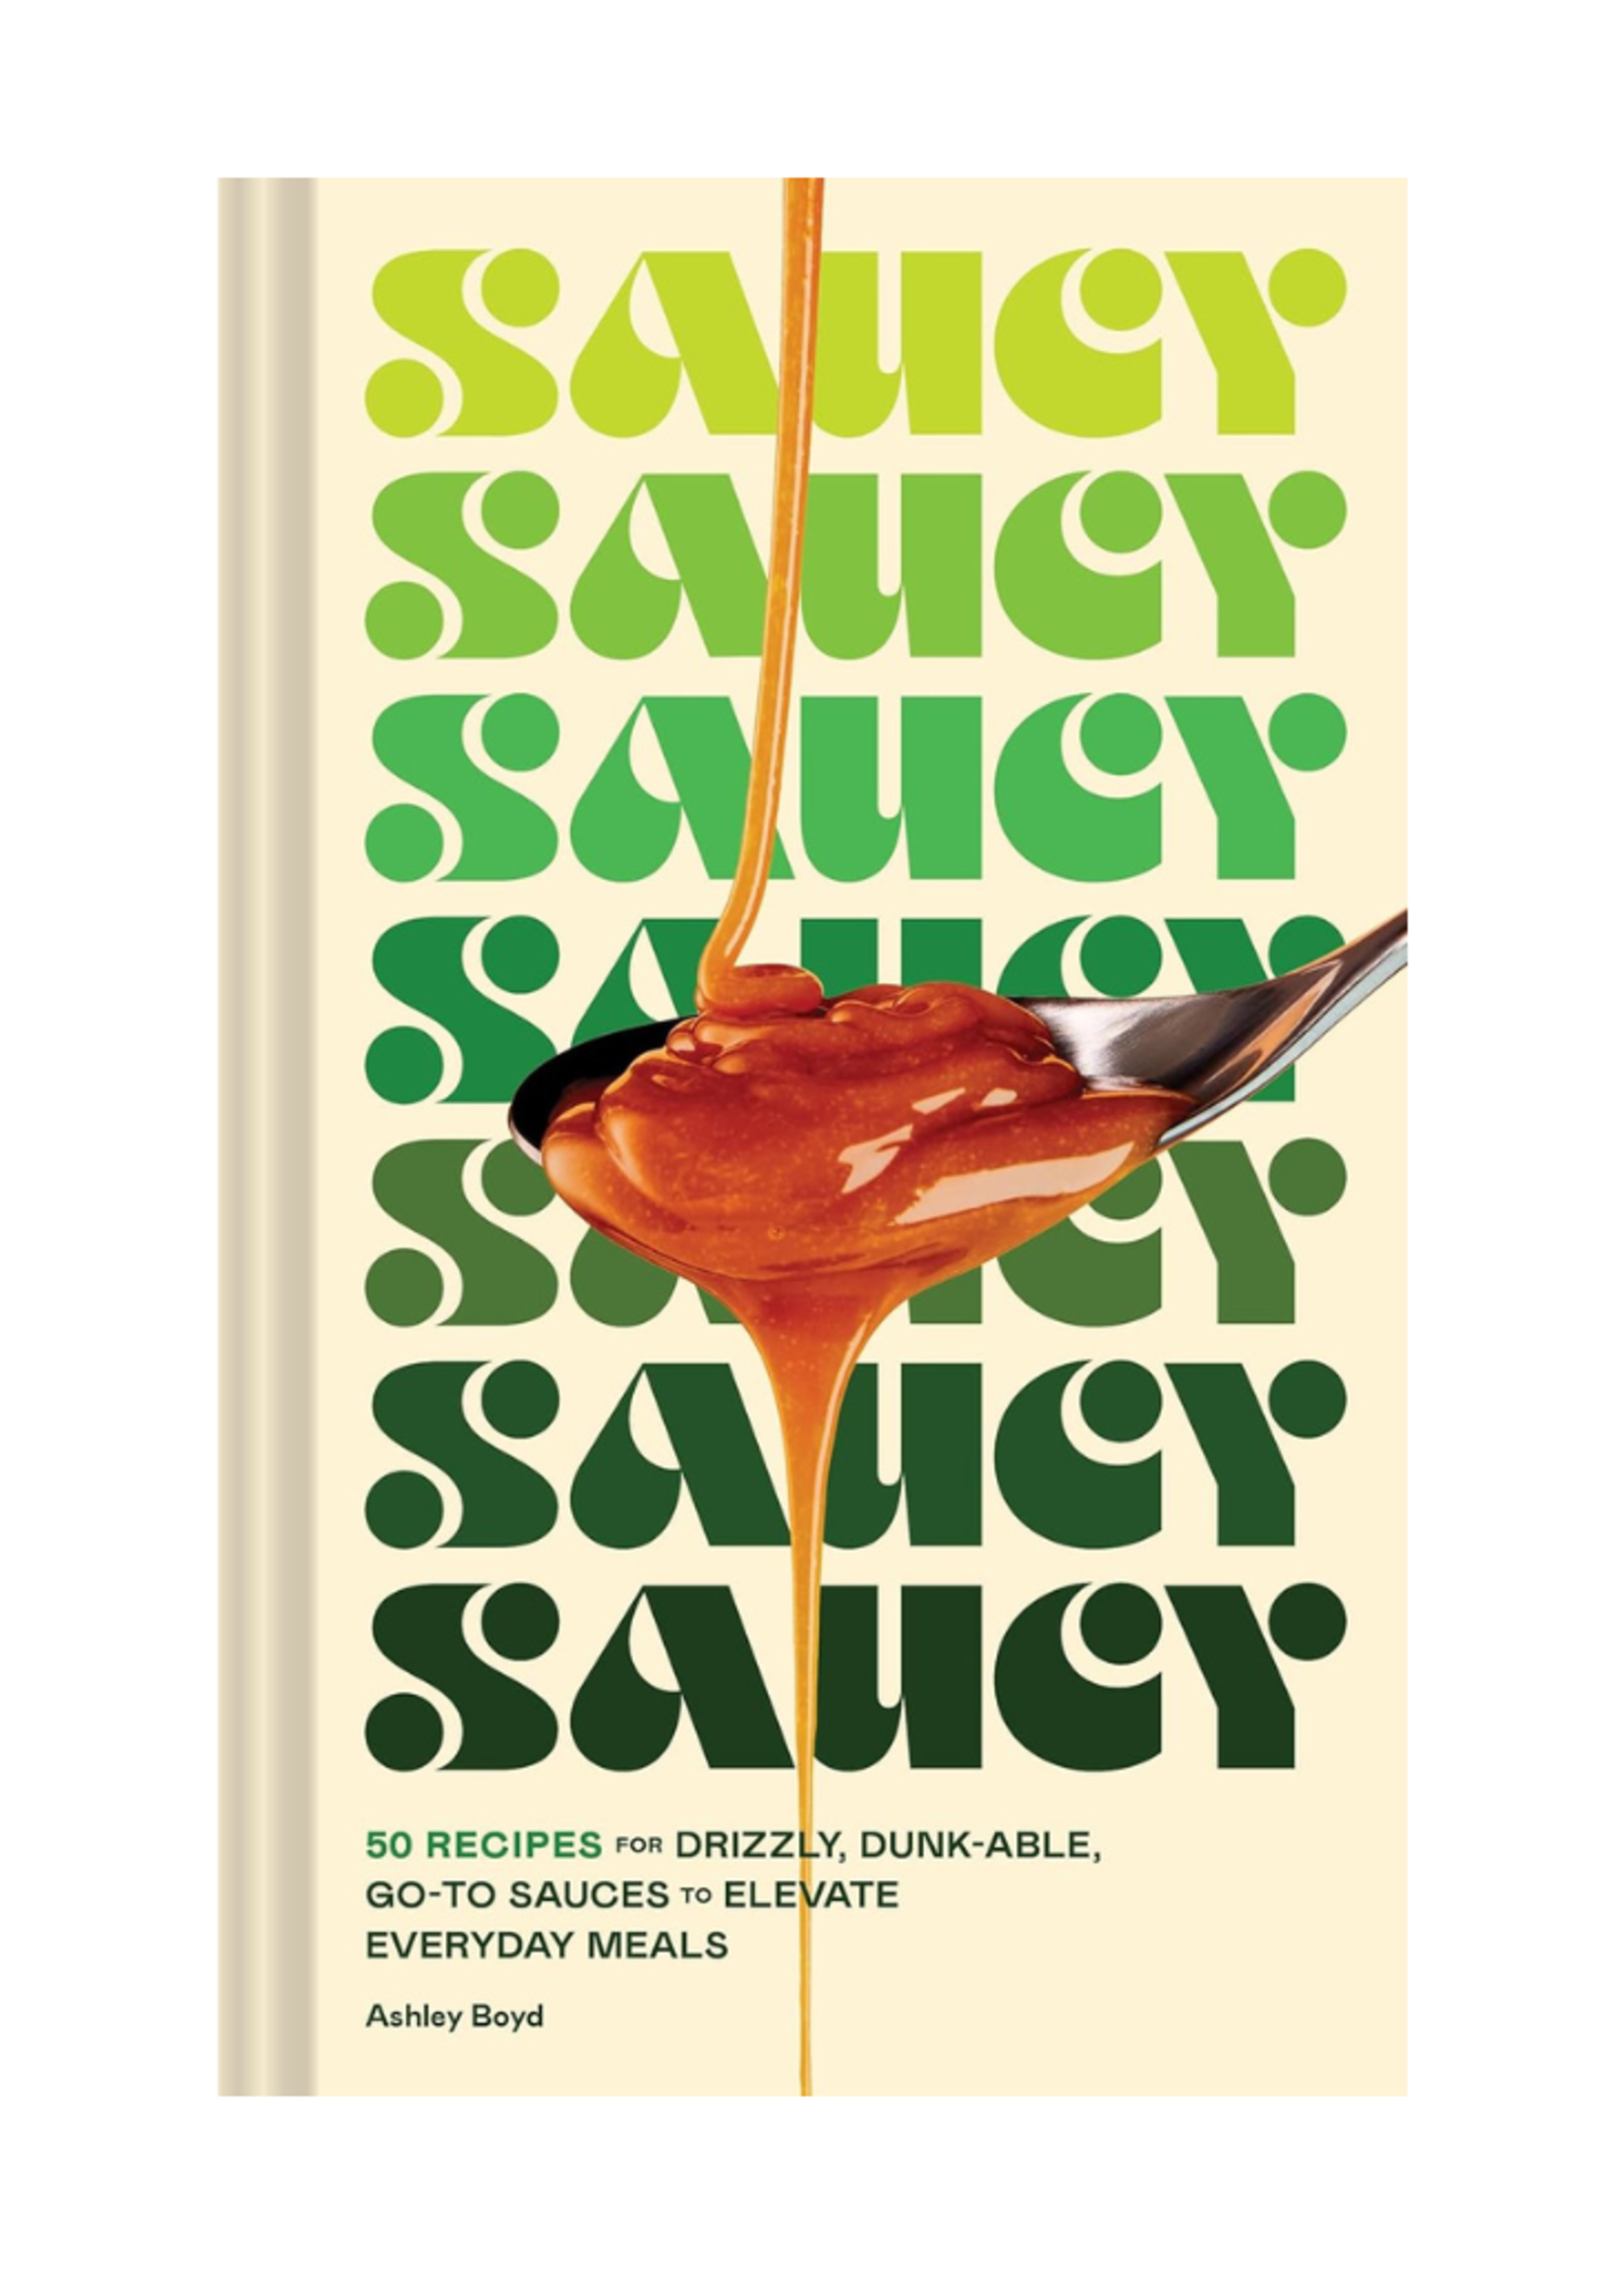 Chronicle Books Saucy: 50 Recipes for Drizzly, Dunk-able, Go-To Sauces to Elevate Everyday Meals by Ashley Boyd